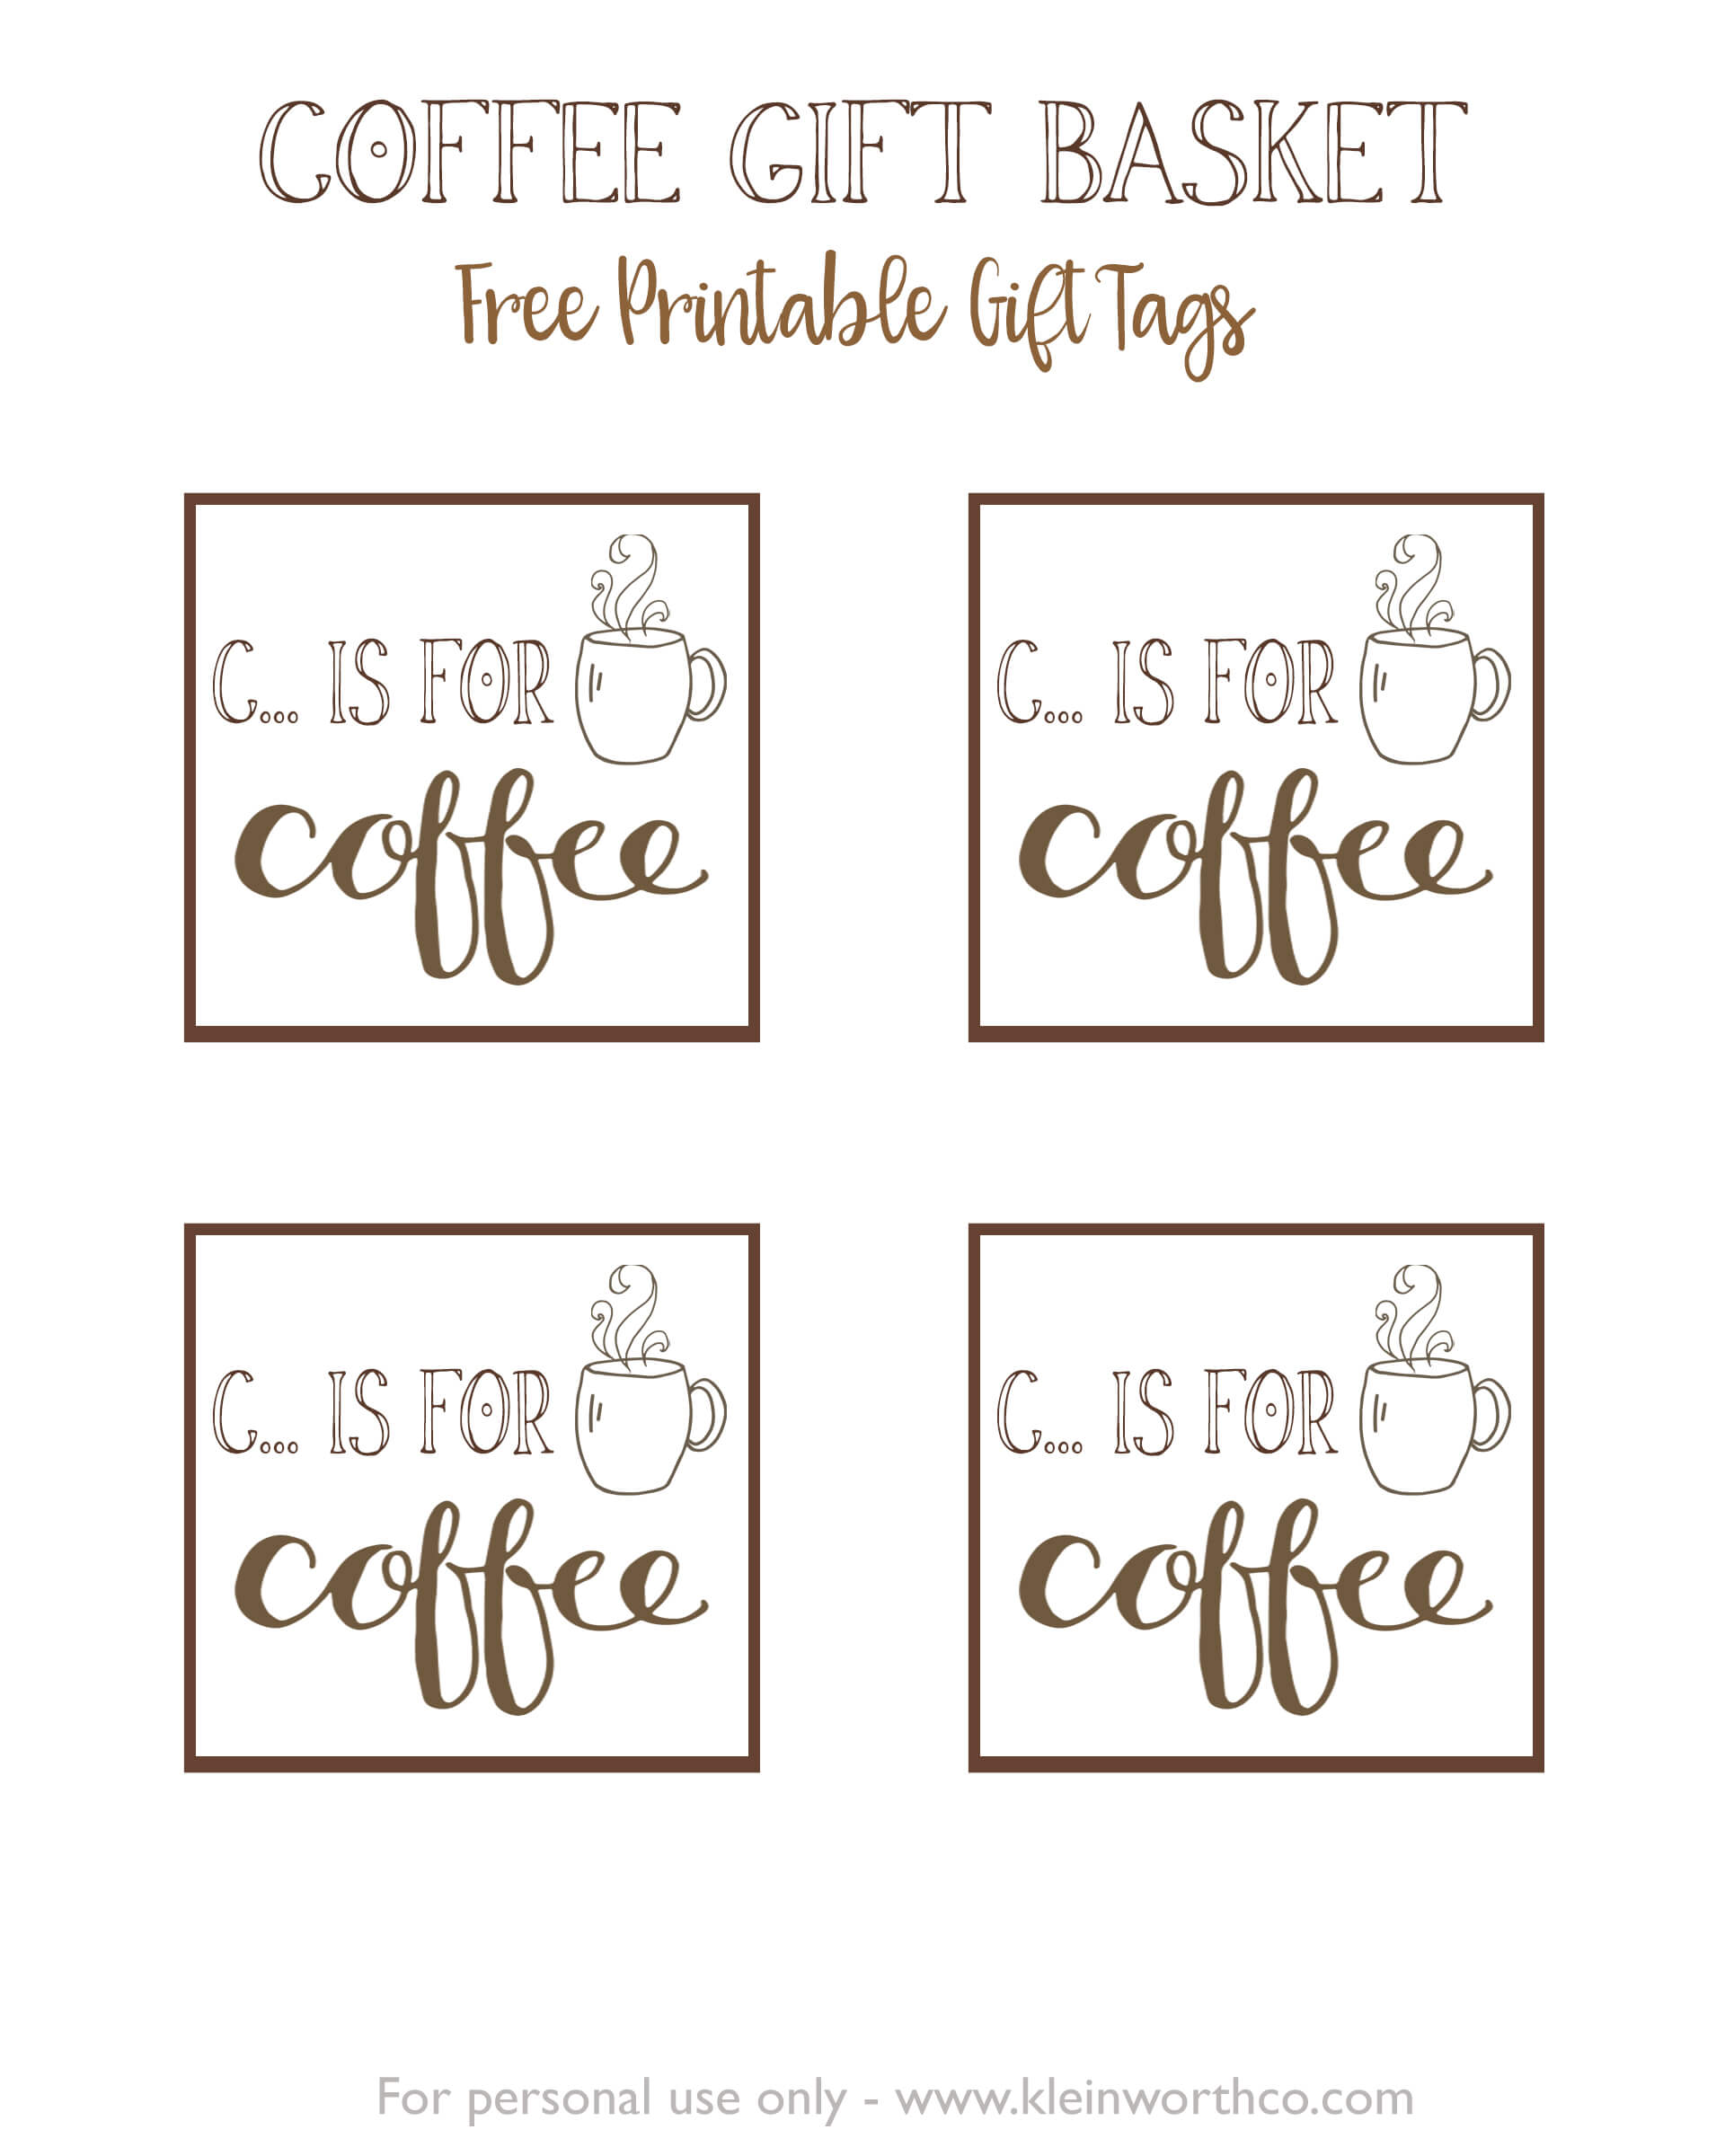 C is for Coffee Gift Tag Printable PRINT jpg 1920 2400 With Images 